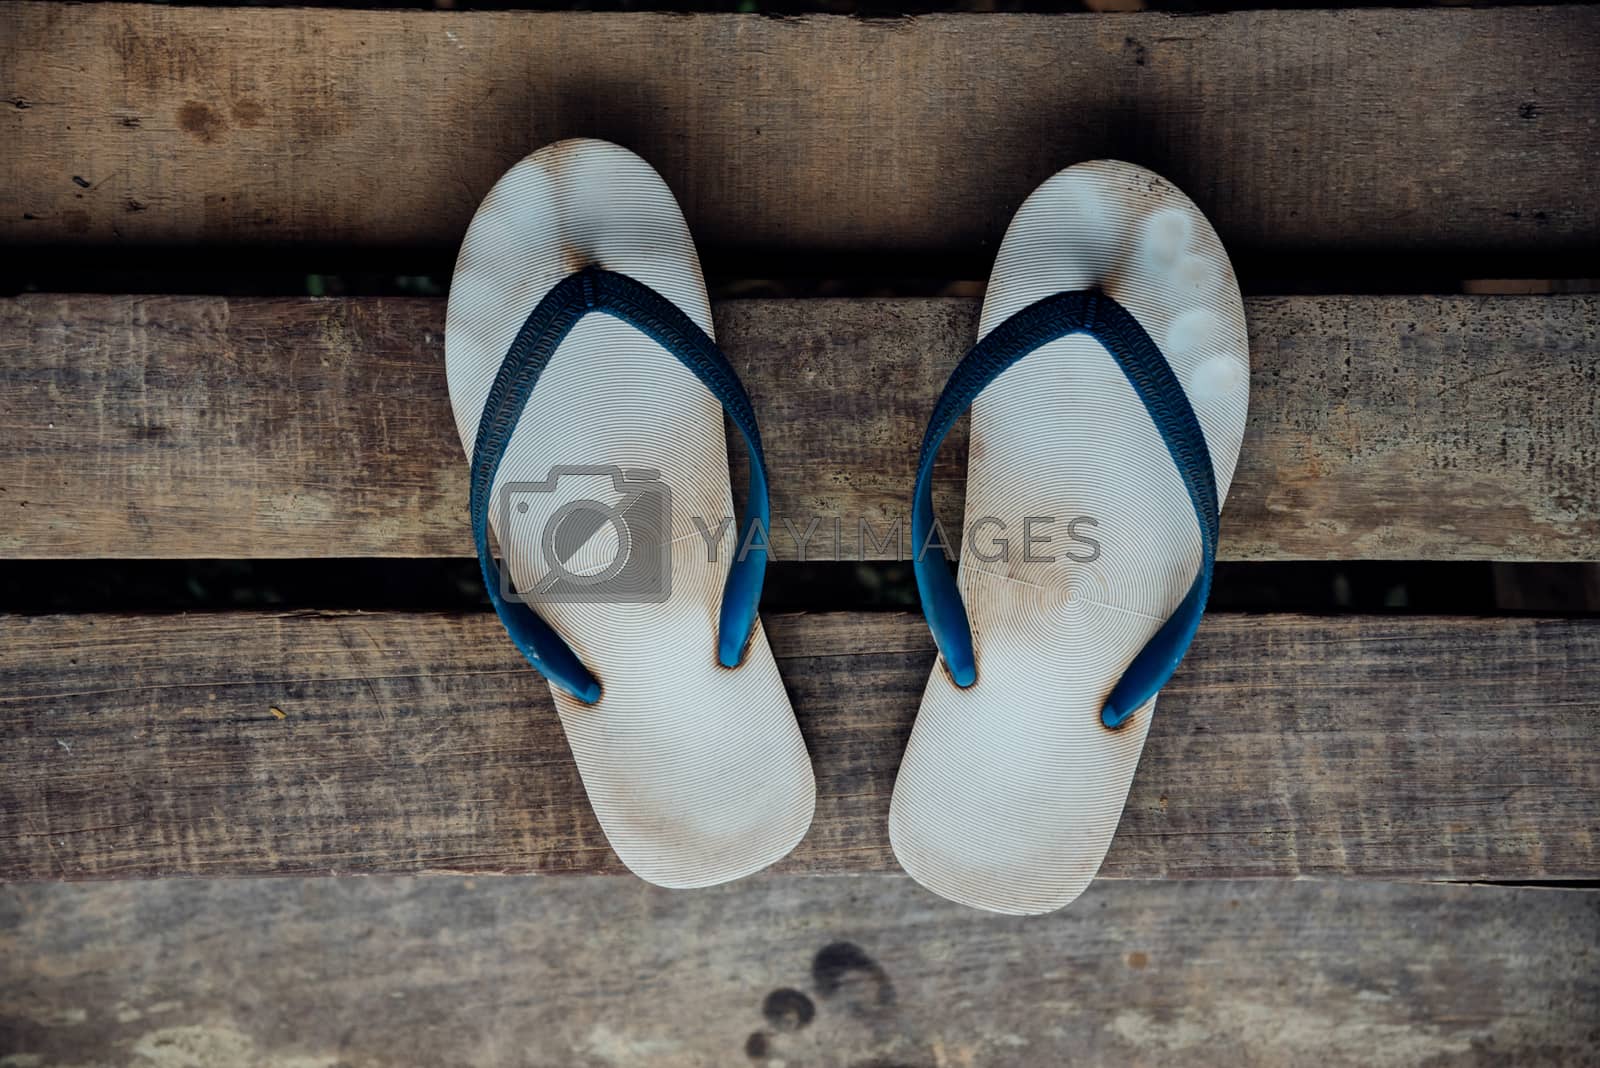 Royalty free image of Sandal or flip-flop blue color on wooden staircase by PongMoji